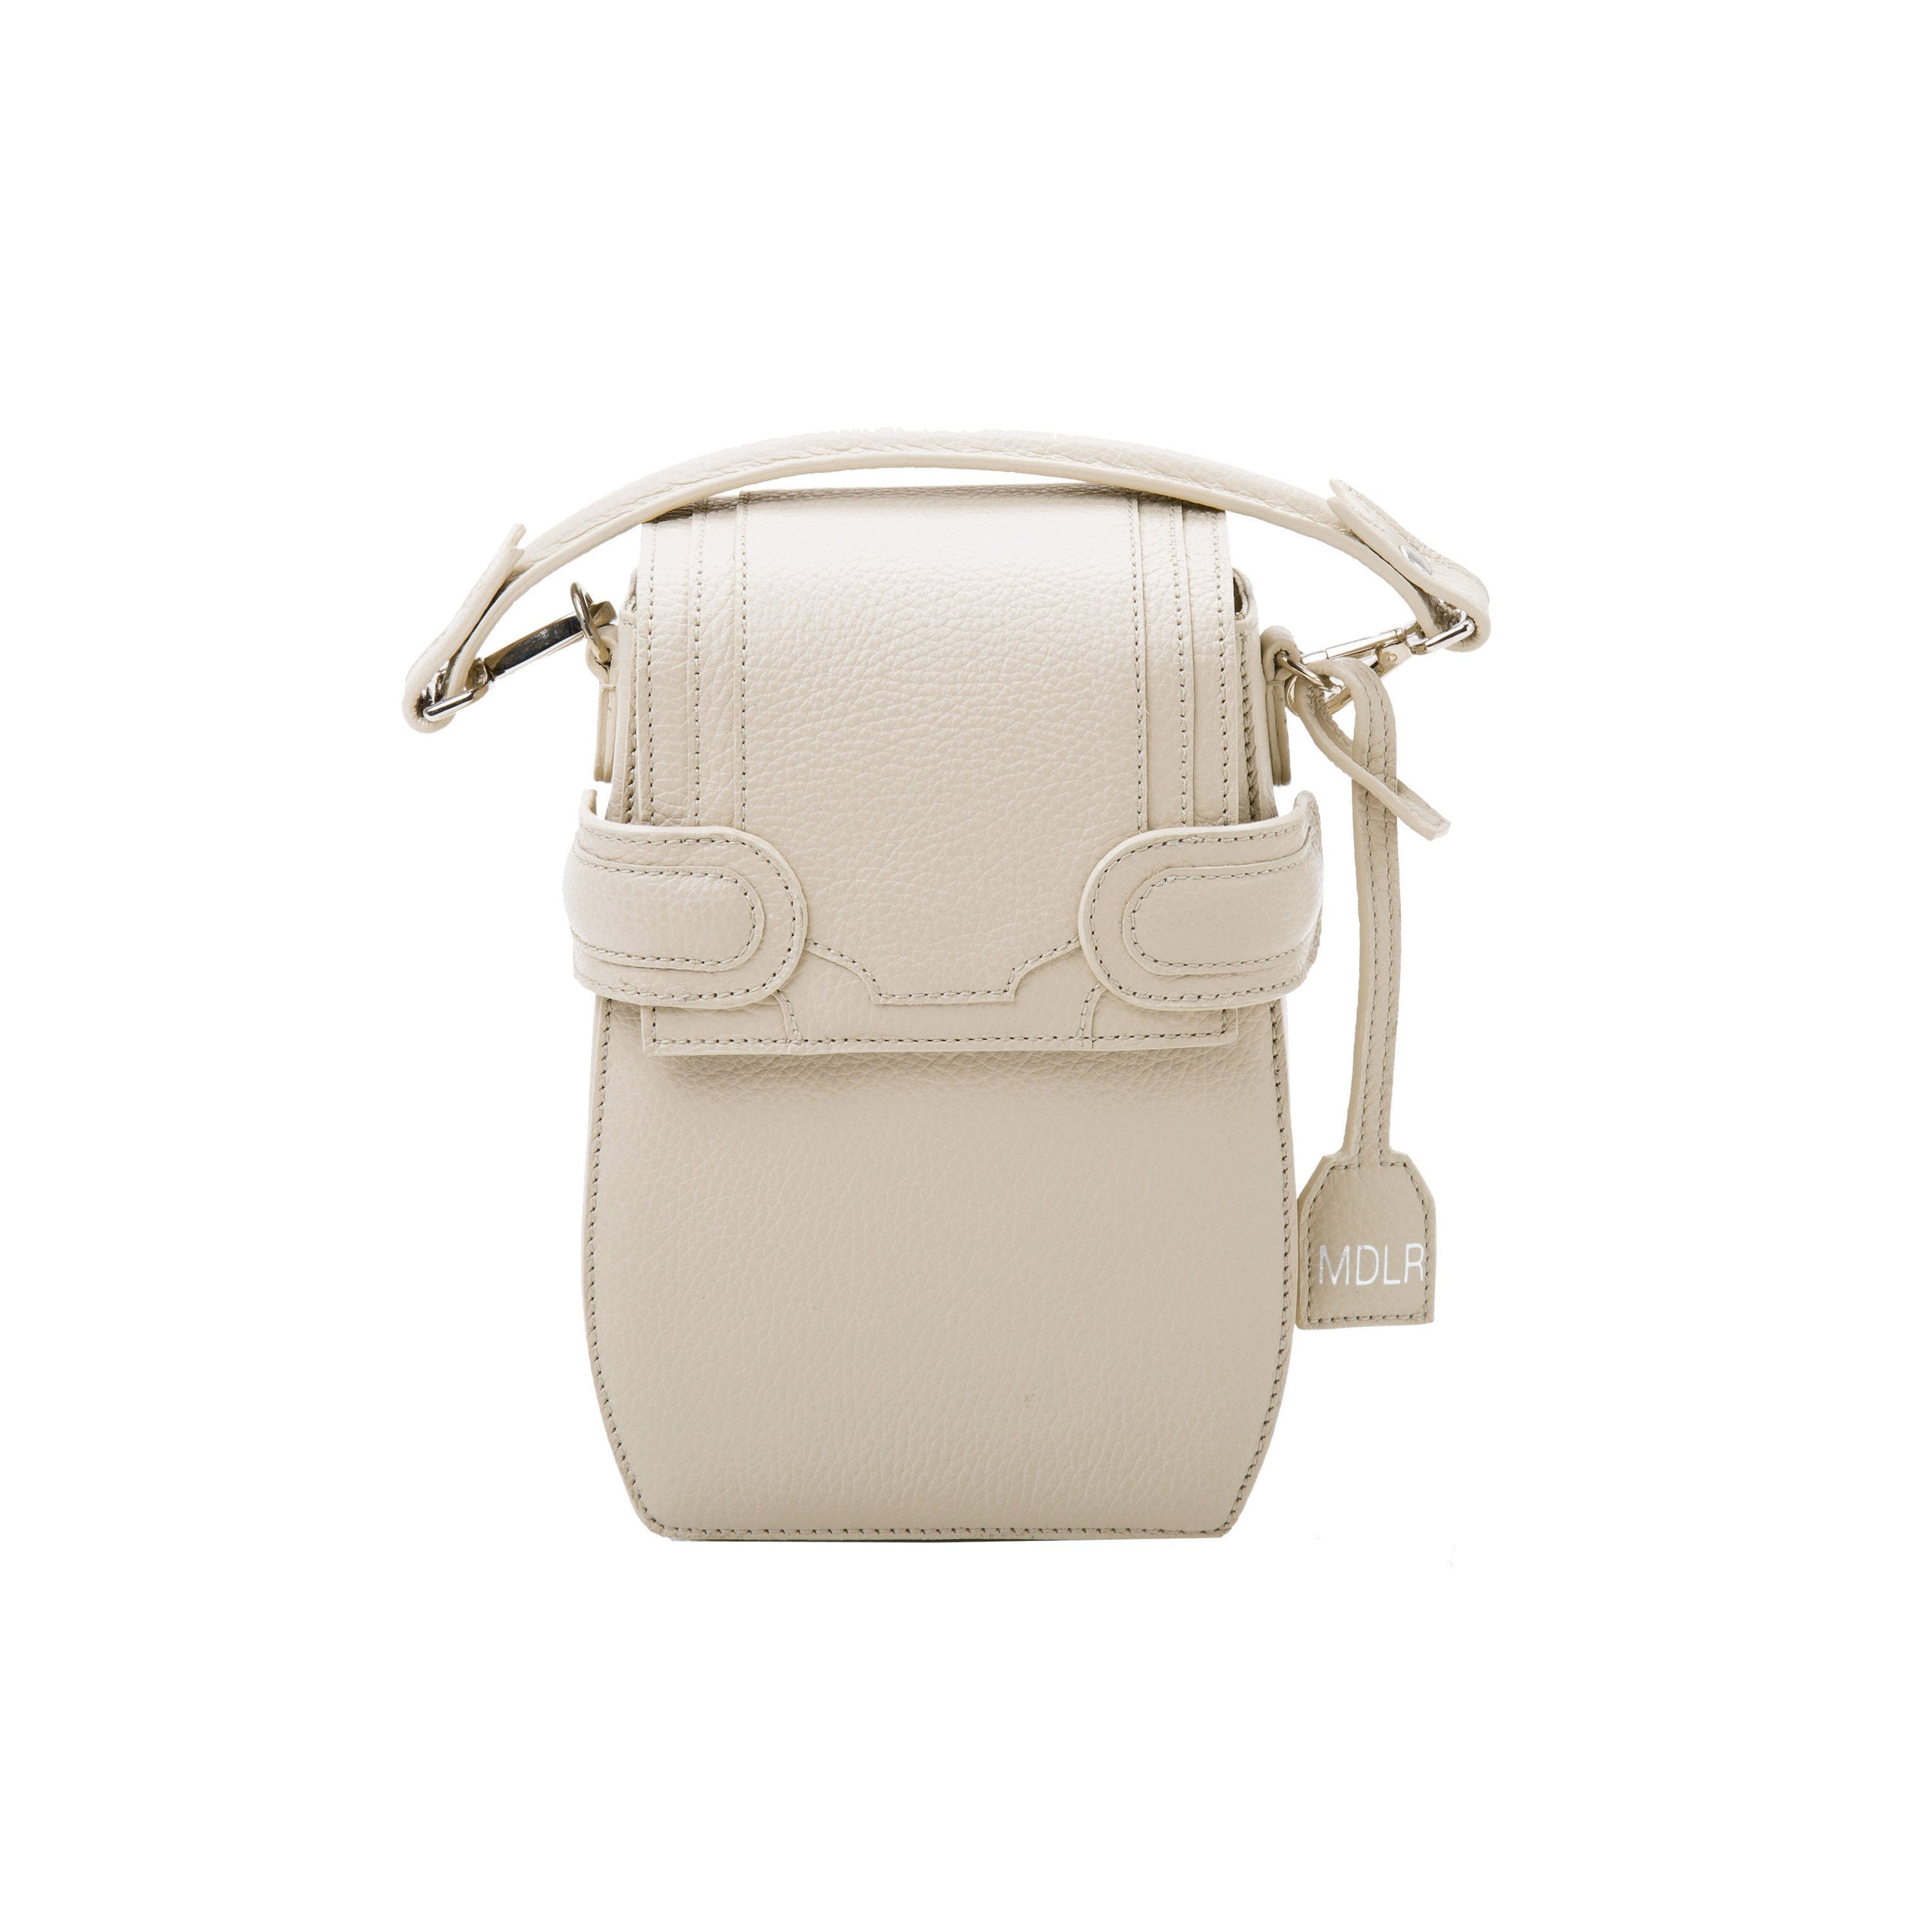 Italian materials and handcrafted in Portugal, OCTAVIO RIS 4 WAY BACKPACK is a cute cream backpack with fashionable look and feel by MDLR